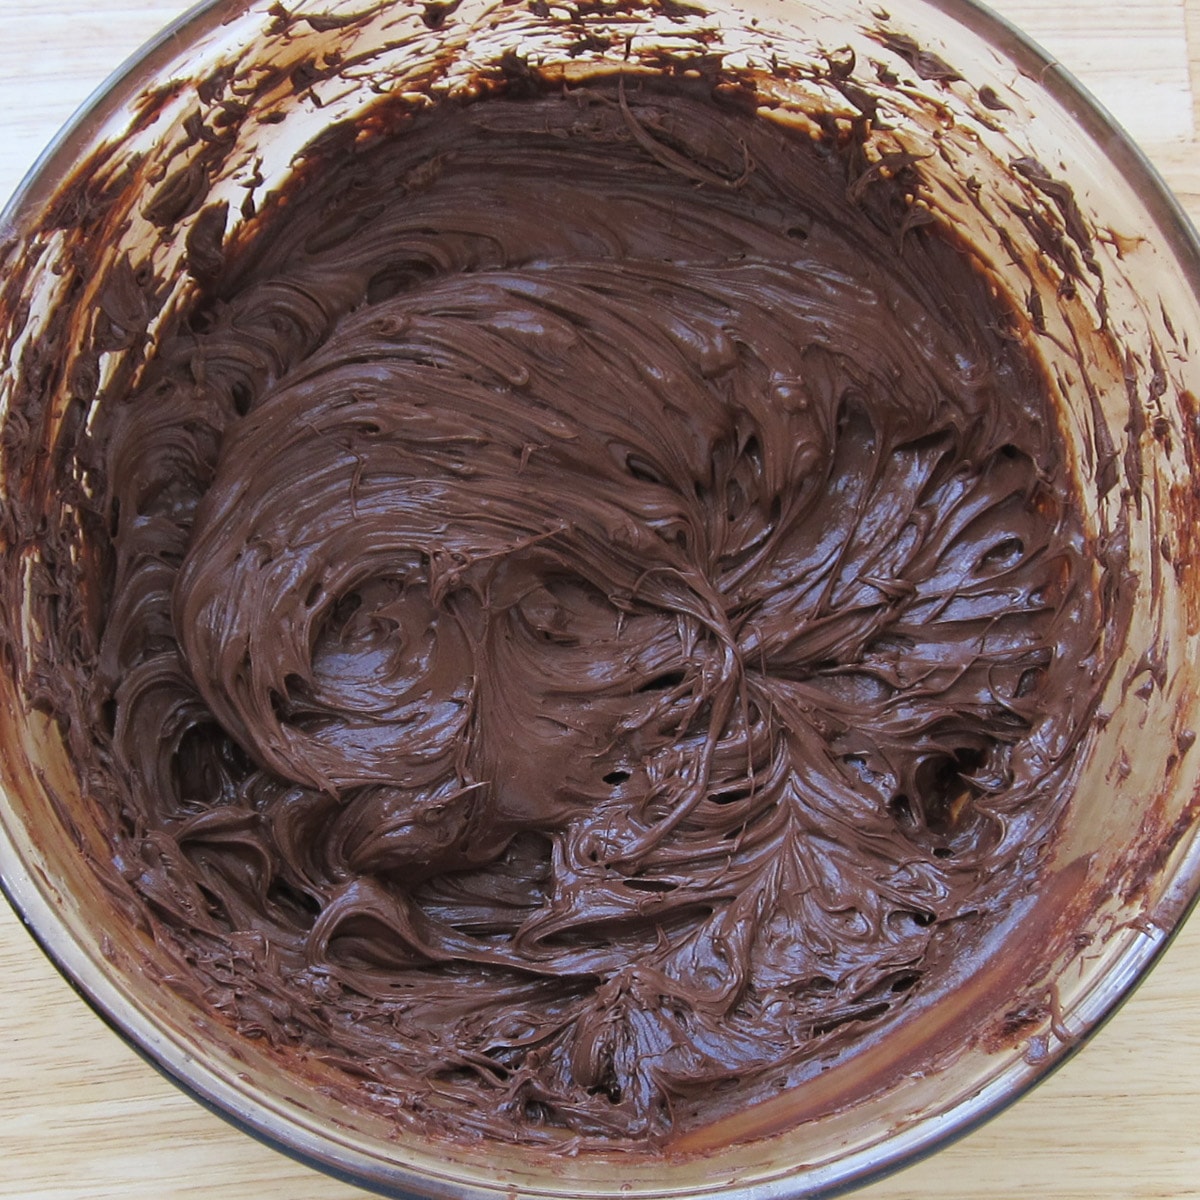 whipped chocolate ganache frosting.